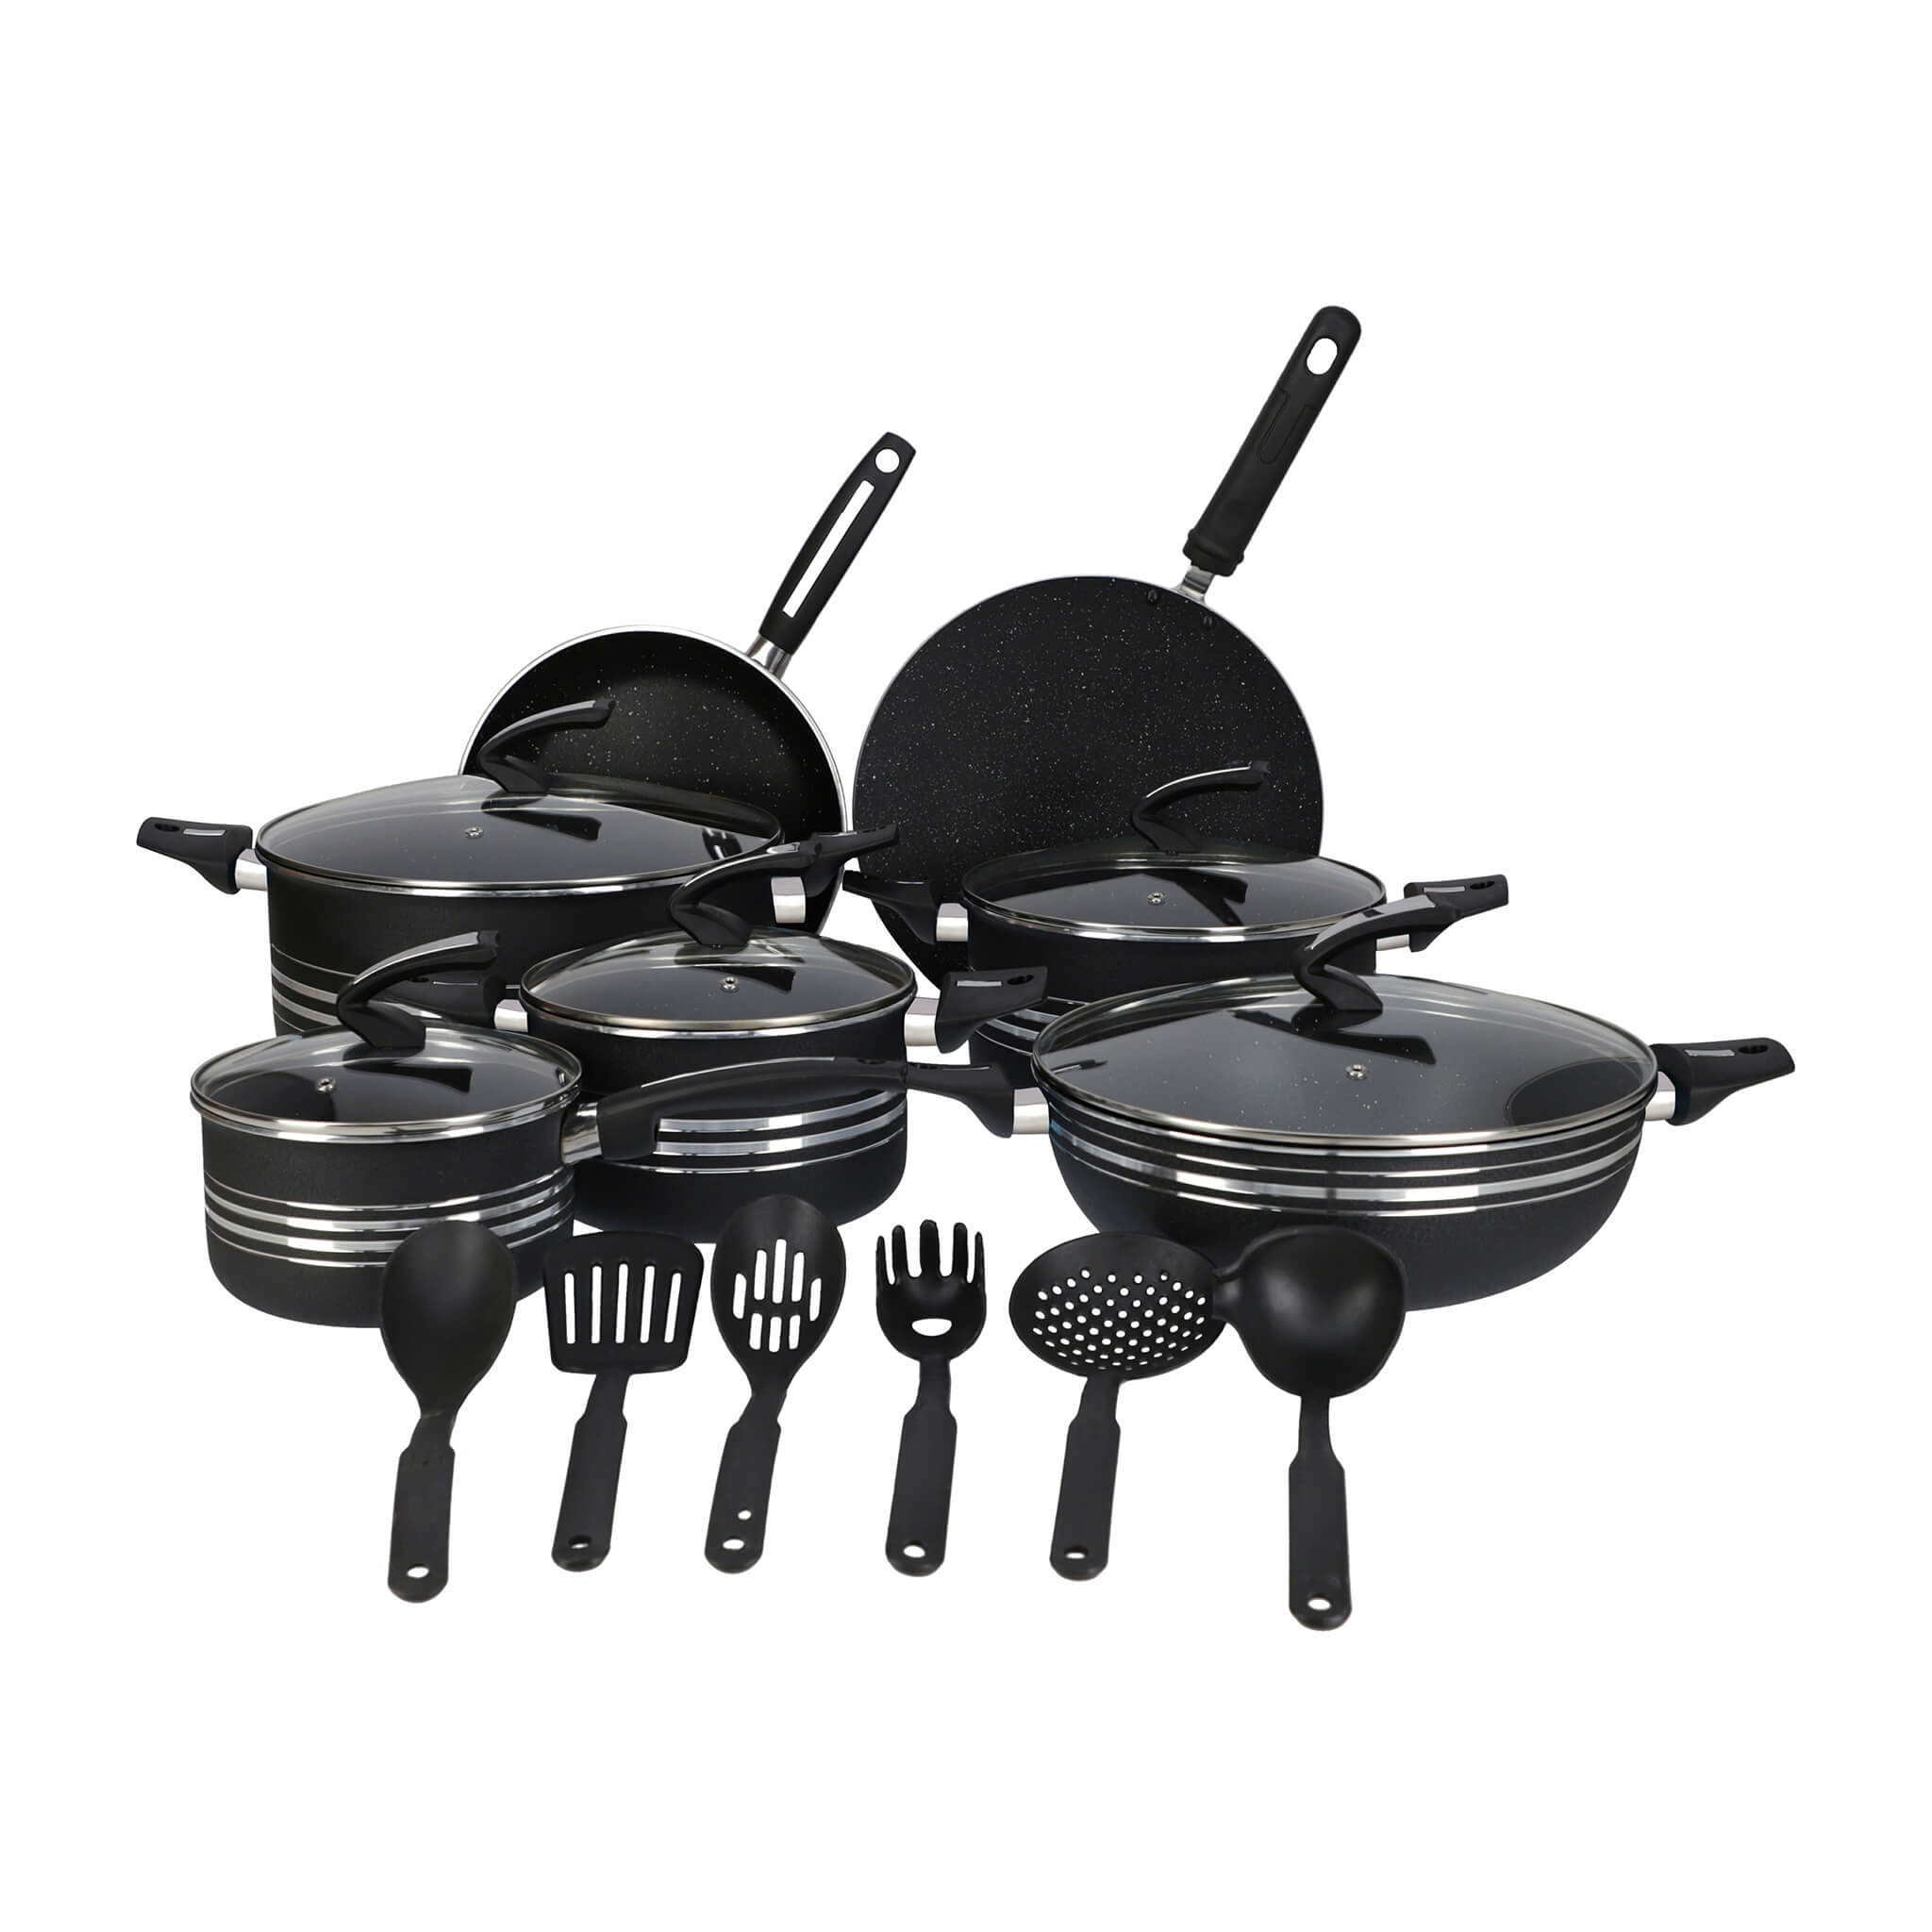 Non-Stick Marble Coating 21 Piece Cooking Set